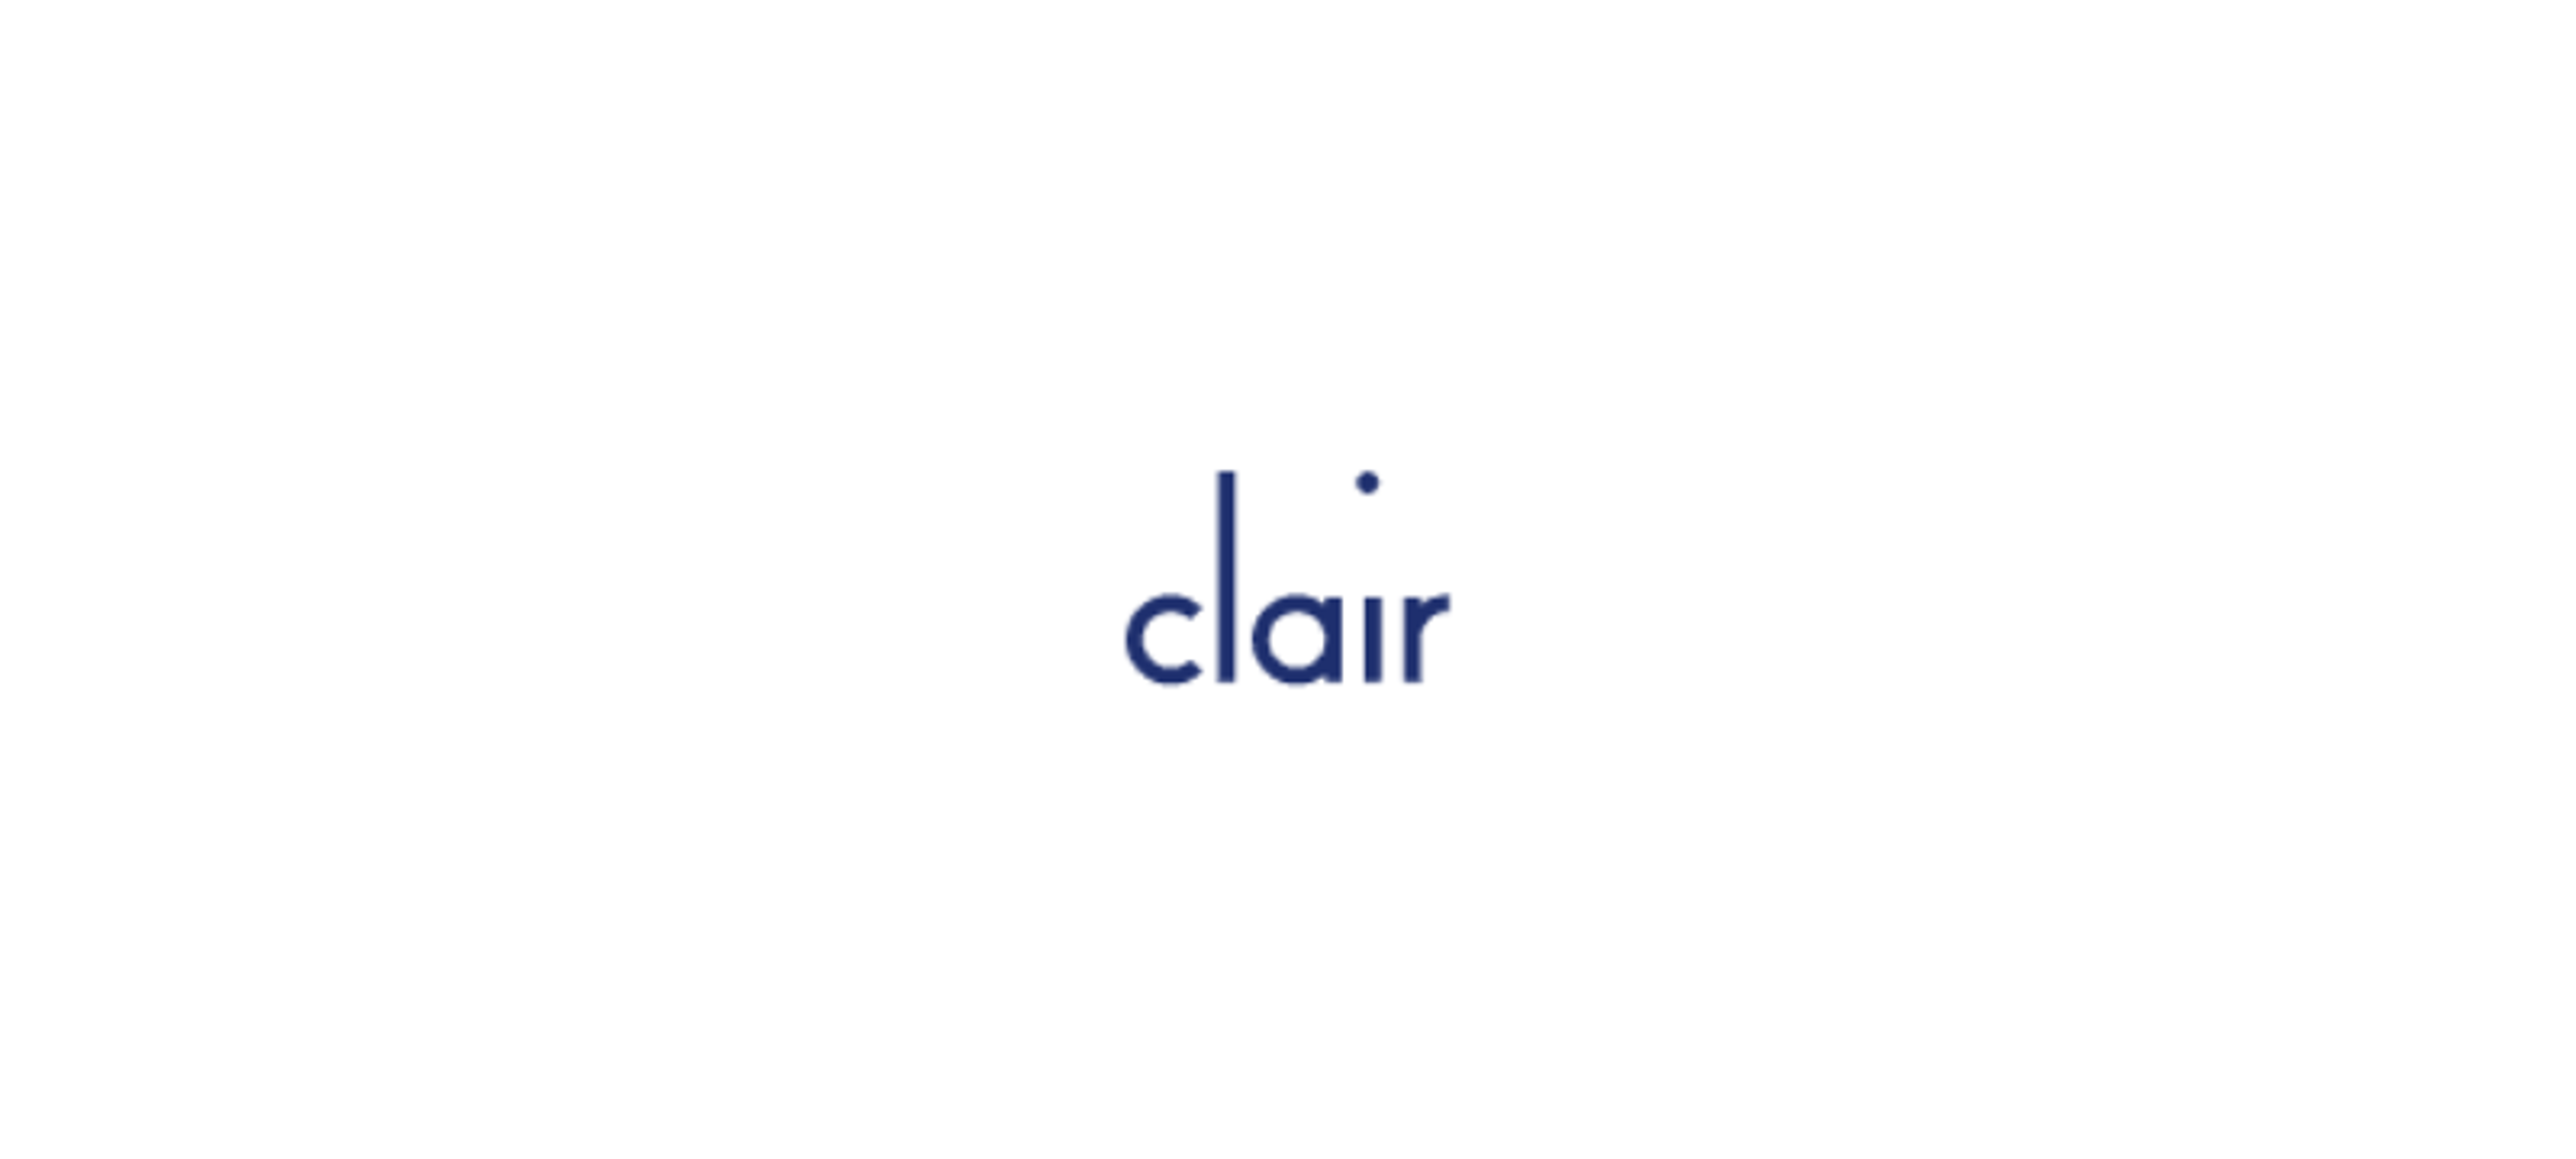 Clair To Disrupt Payday Lending With $4.5M Seed Round